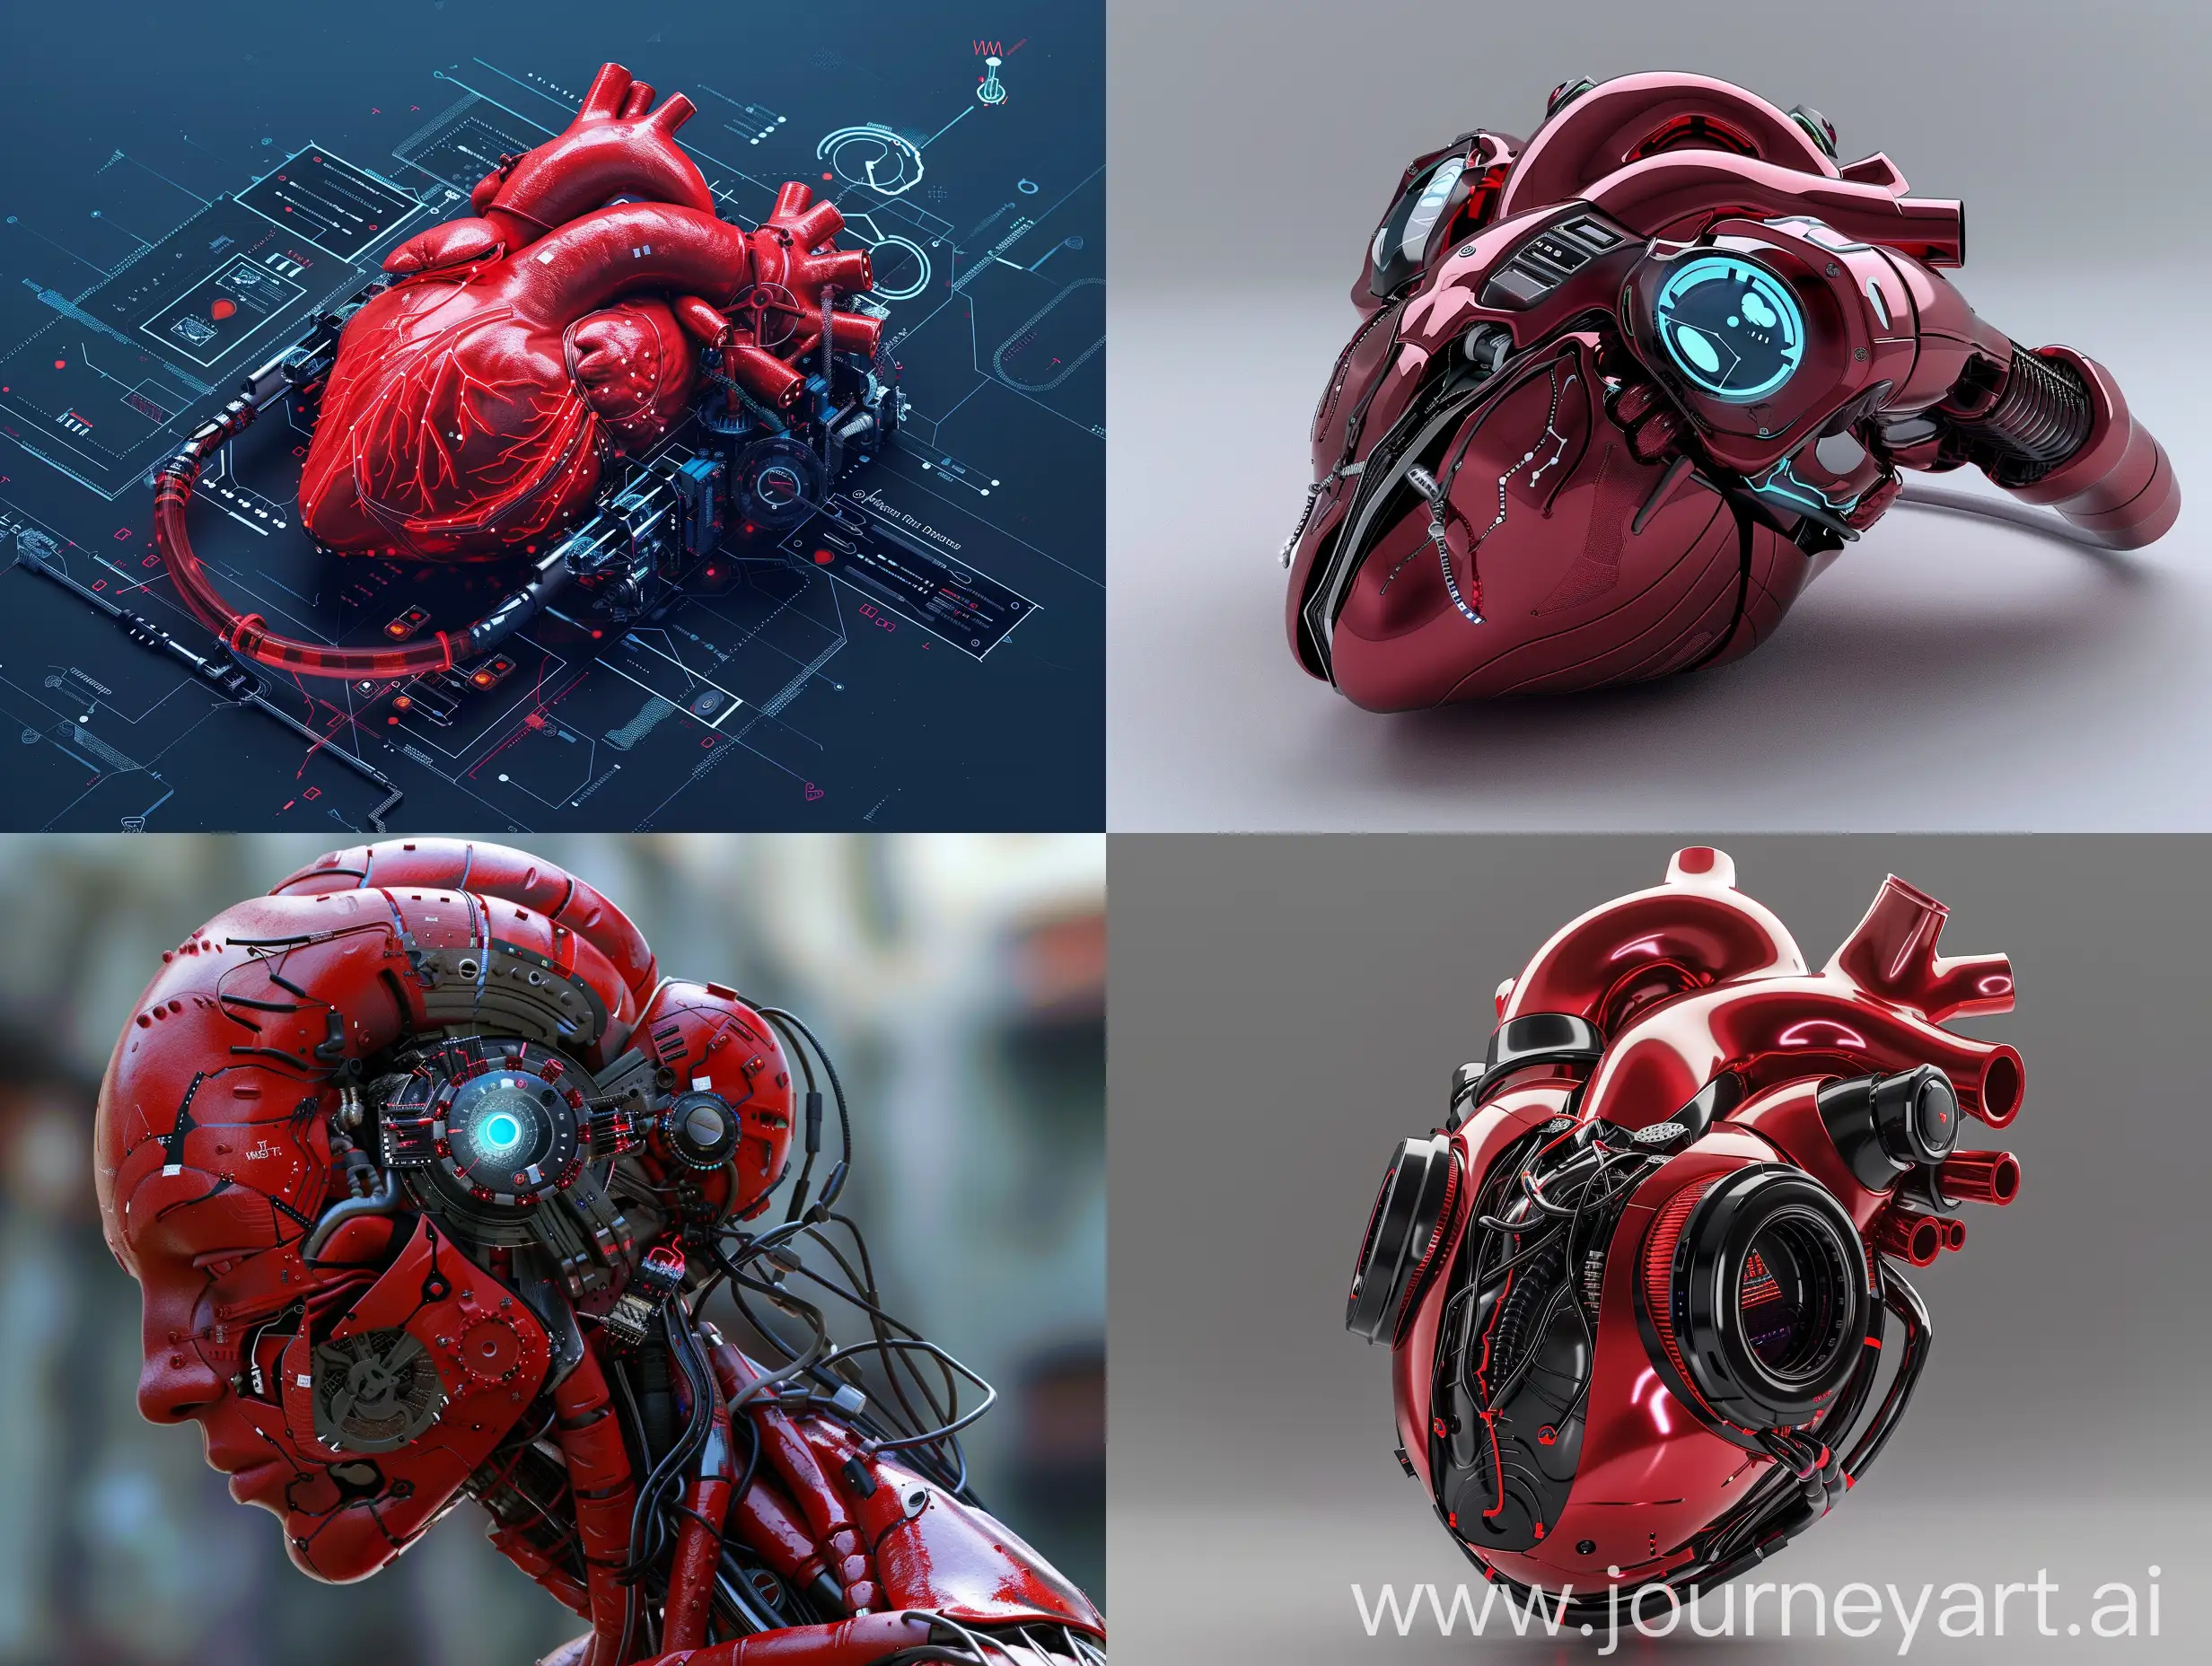 Cyberpunk-Heart-Futuristic-Product-Design-with-Electronic-Elements